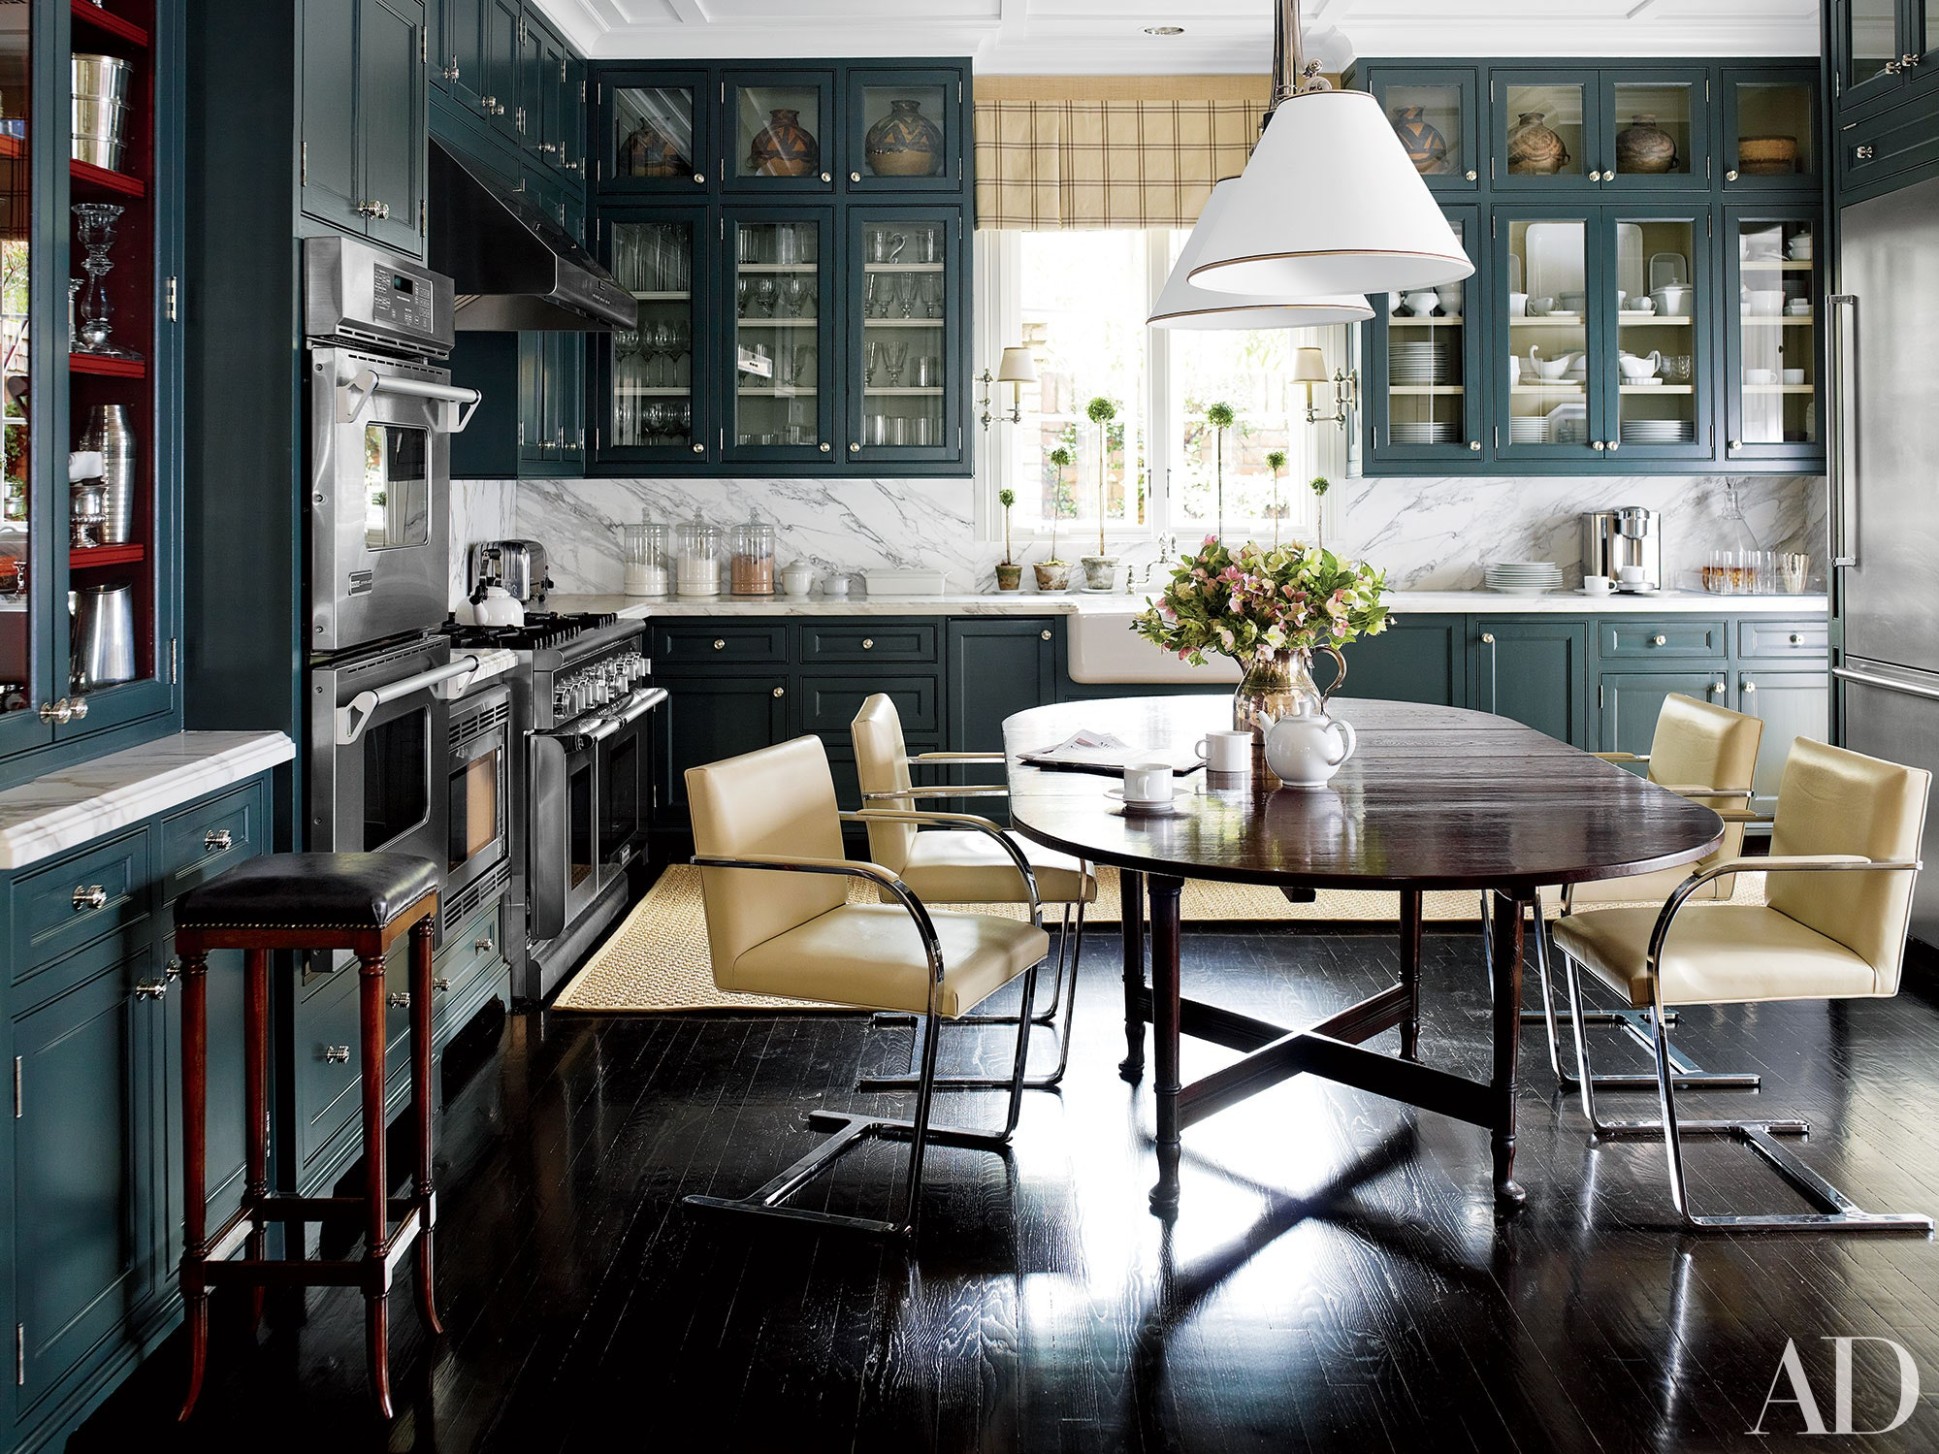 5 Stunning Traditional Kitchens  Architectural Digest - favorite kitchens architectural digest